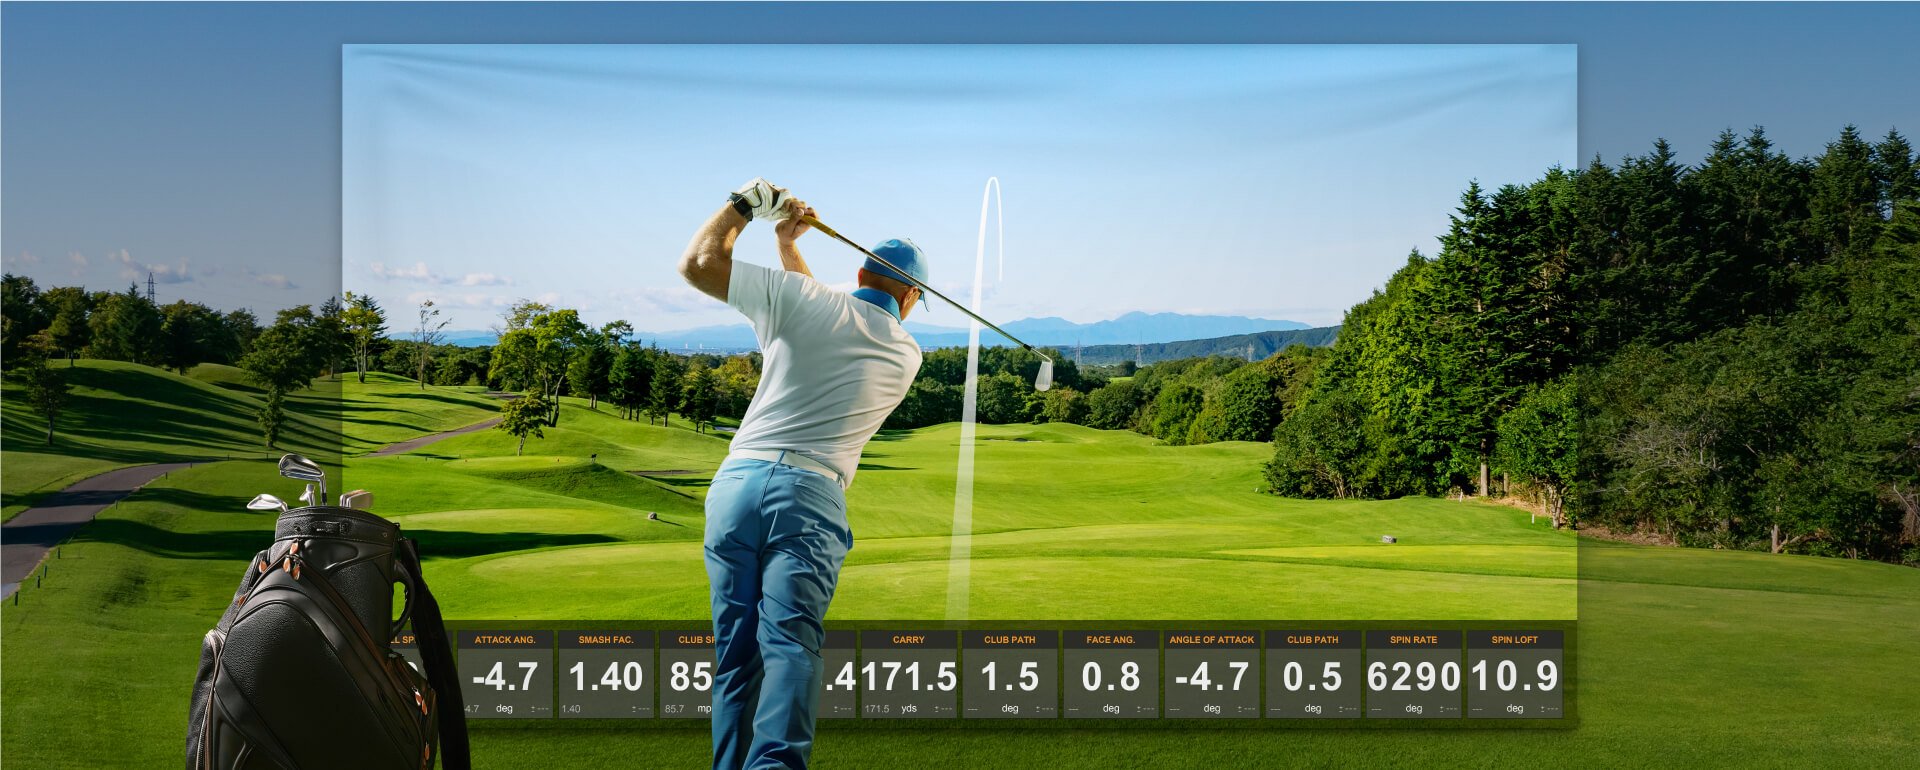 BenQ Installation Projectors offer Accurate Details for Greater Accuracy and Subtle Ambience at golf pratice